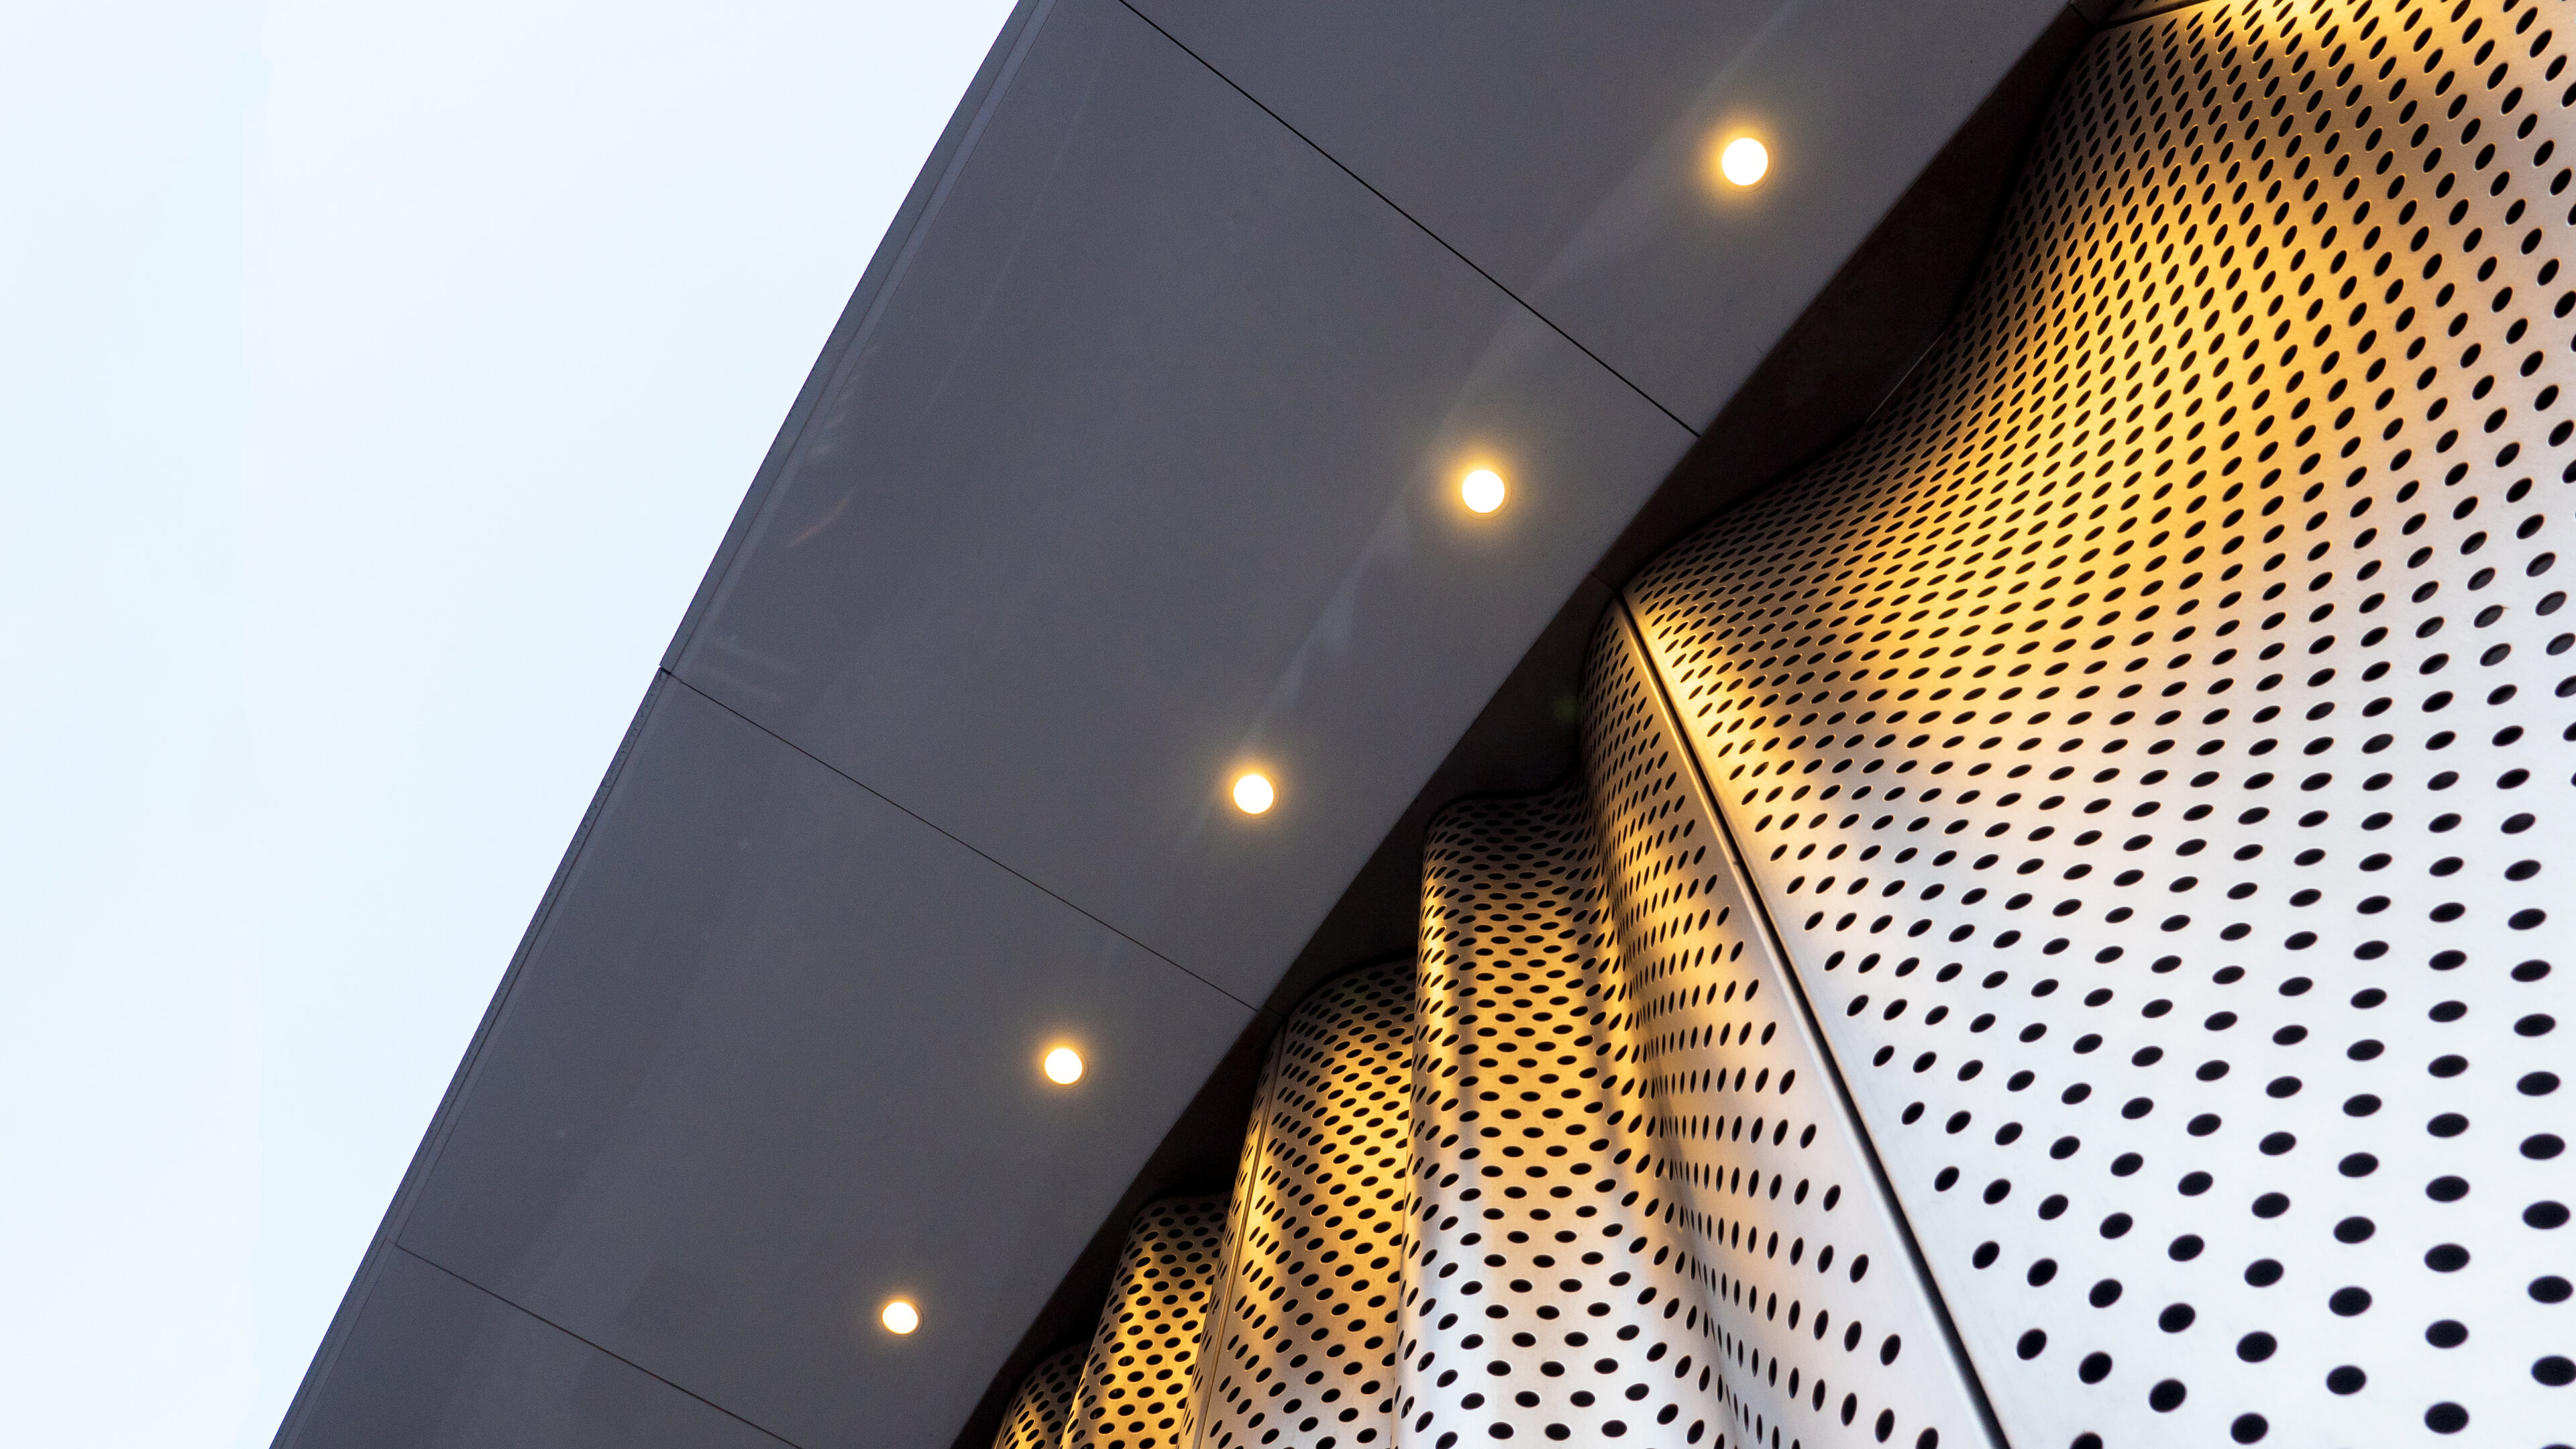 POHL perforated sheet metal facade